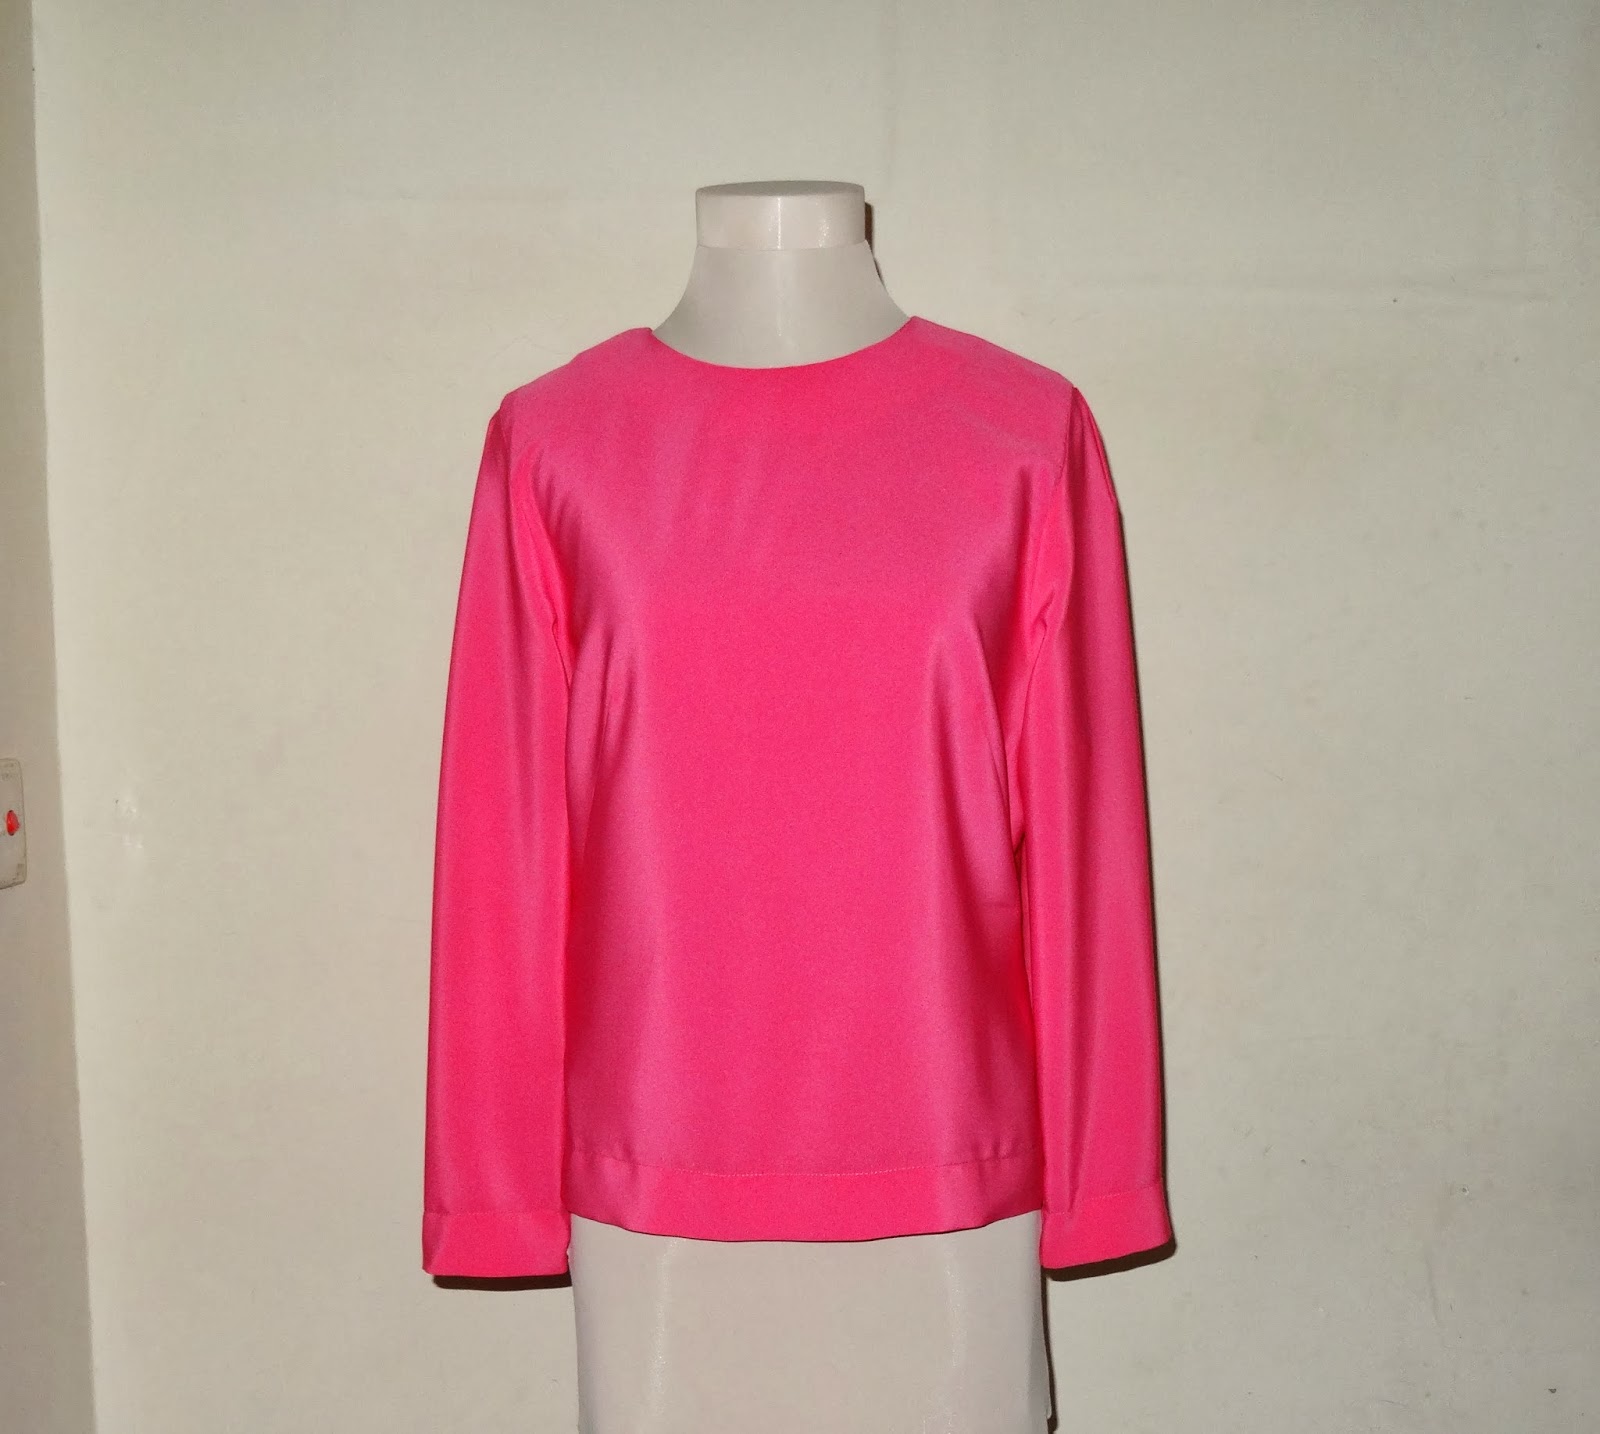 Finished February Garment - Pink Blouse